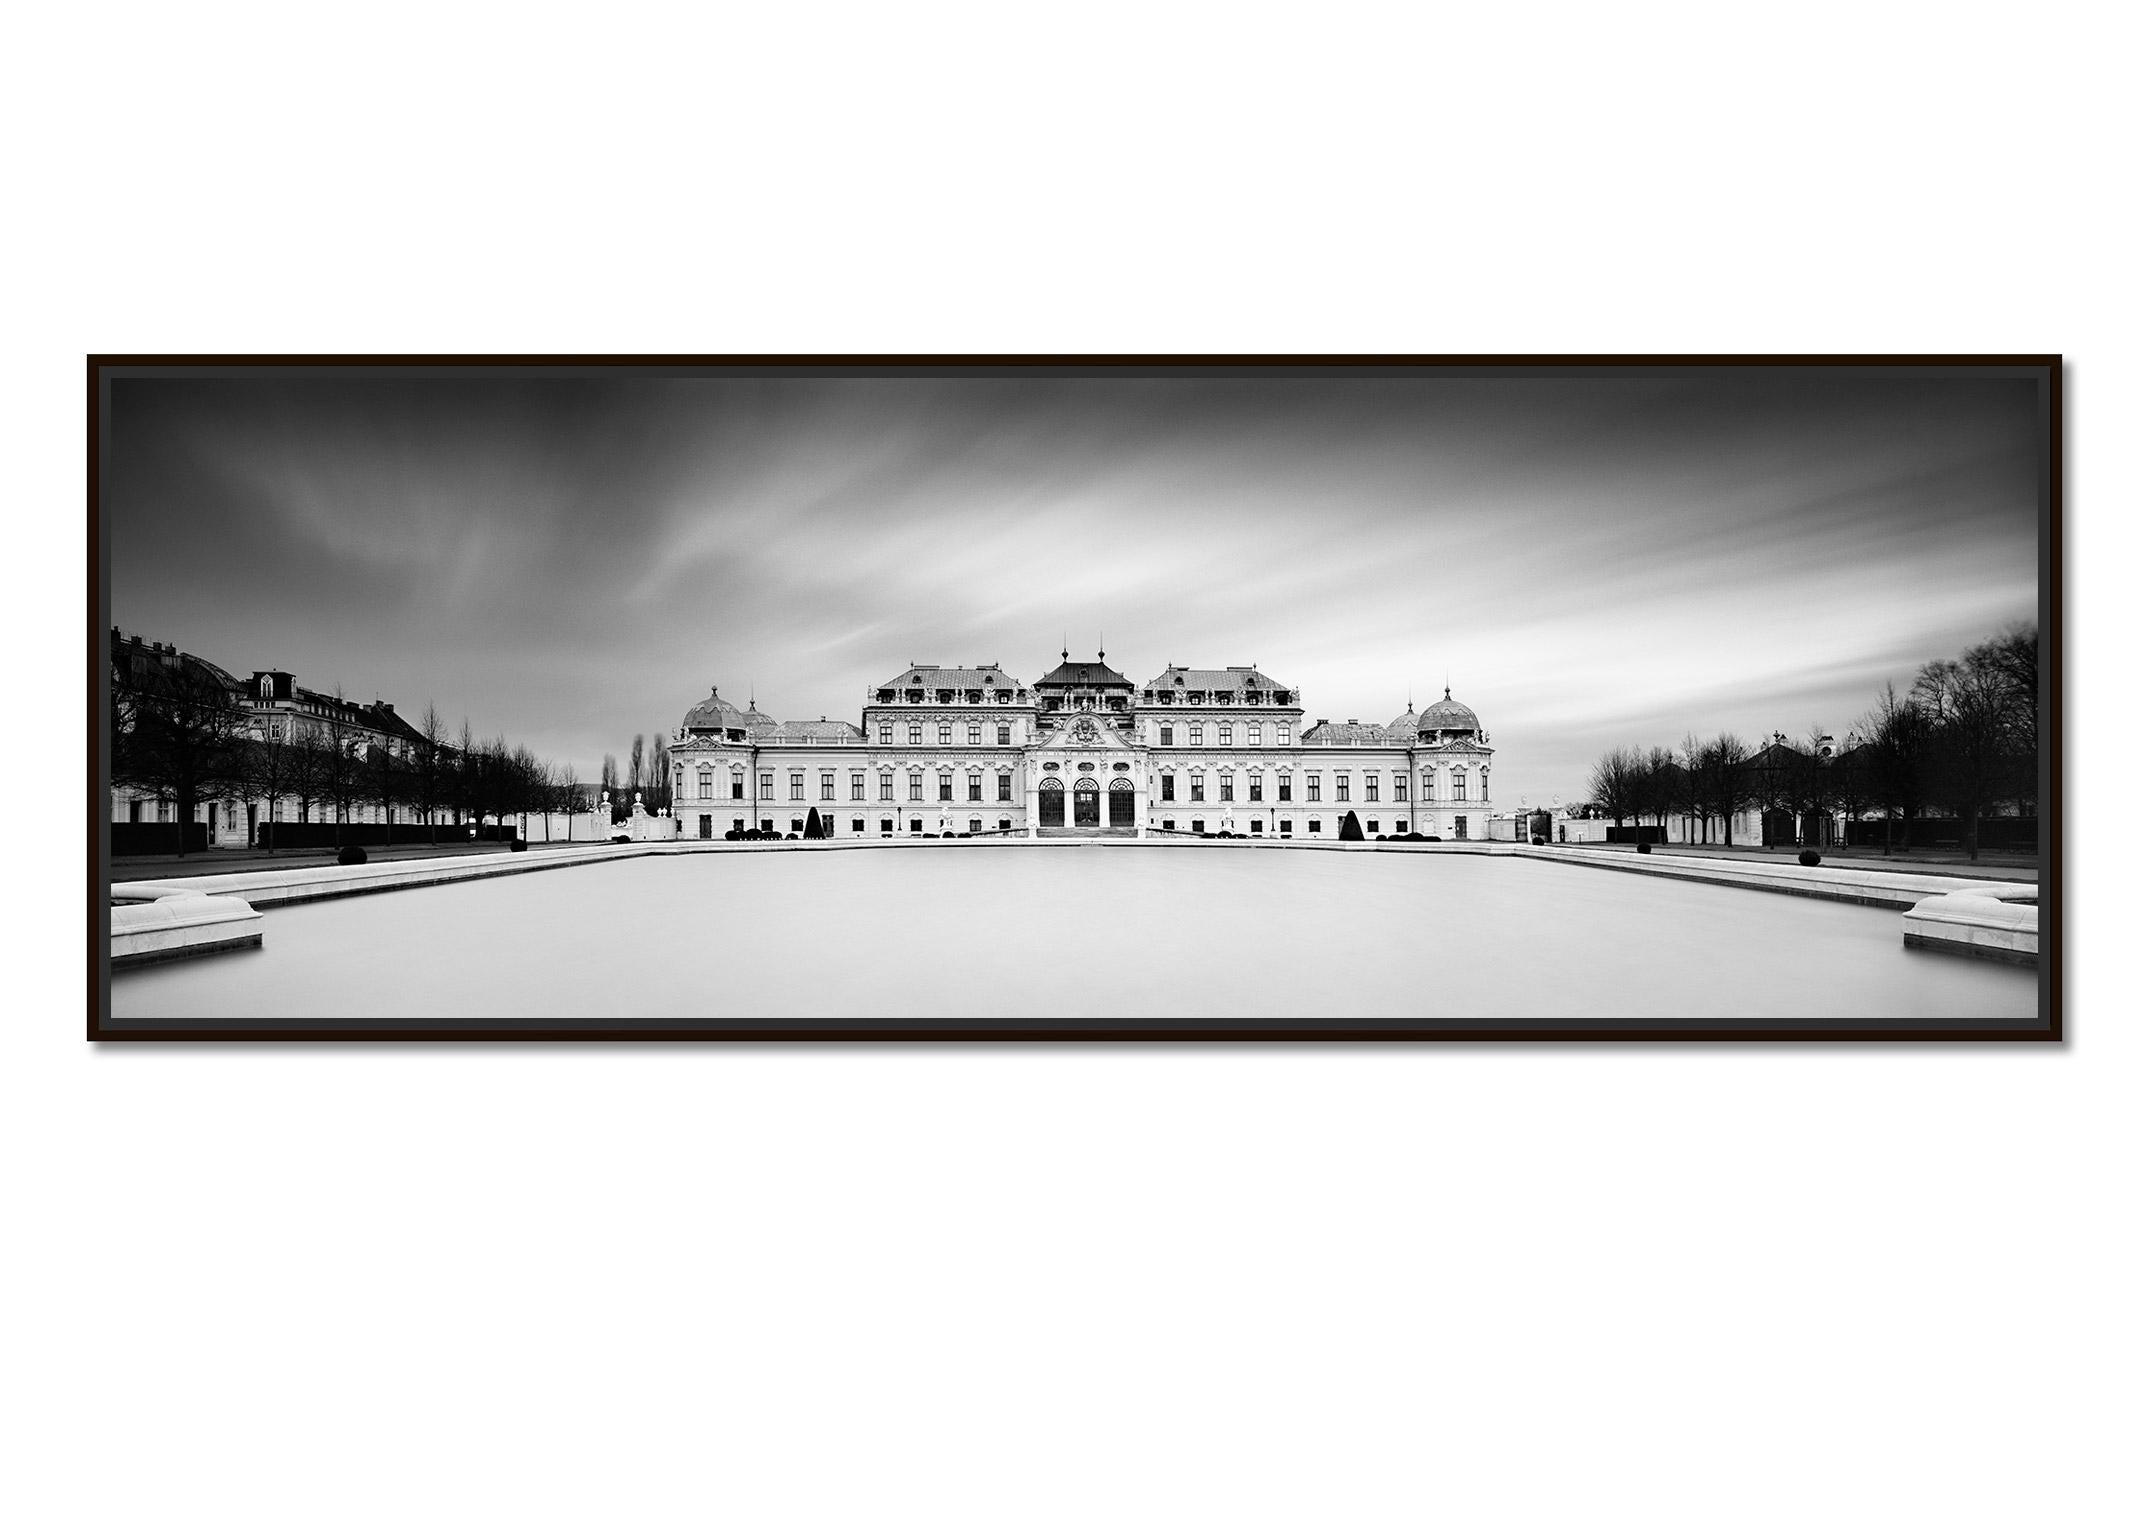 Upper Belvedere palace, Panorama, Vienna, black & white landscape photography - Photograph by Gerald Berghammer